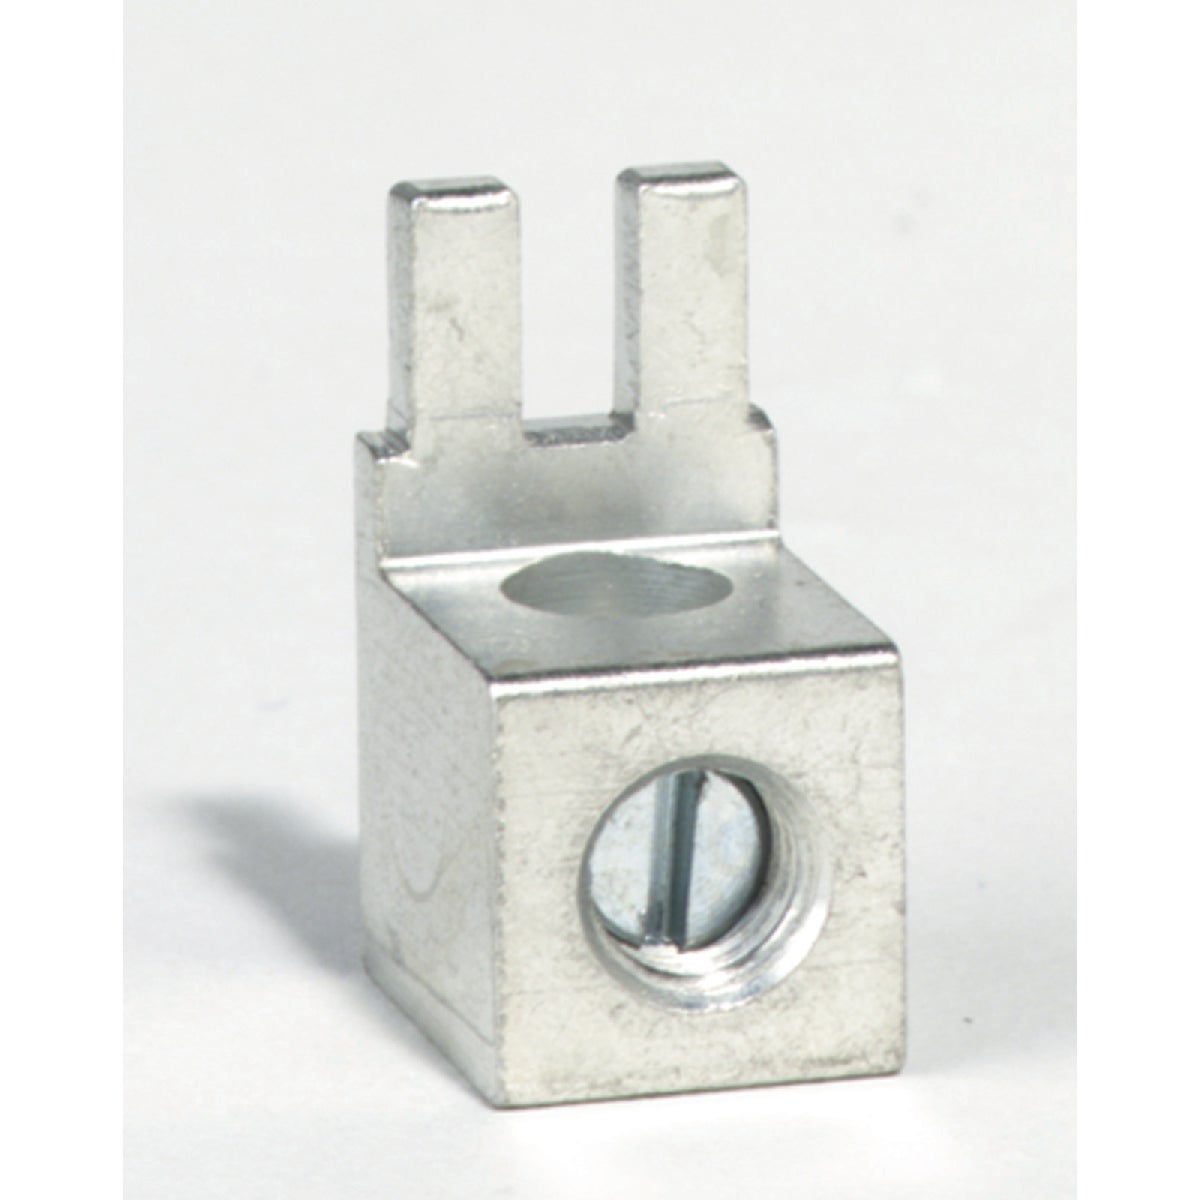 Item 550515, QO neutral lug kit. For use with 12/2 aluminum or 14/4 copper wire.